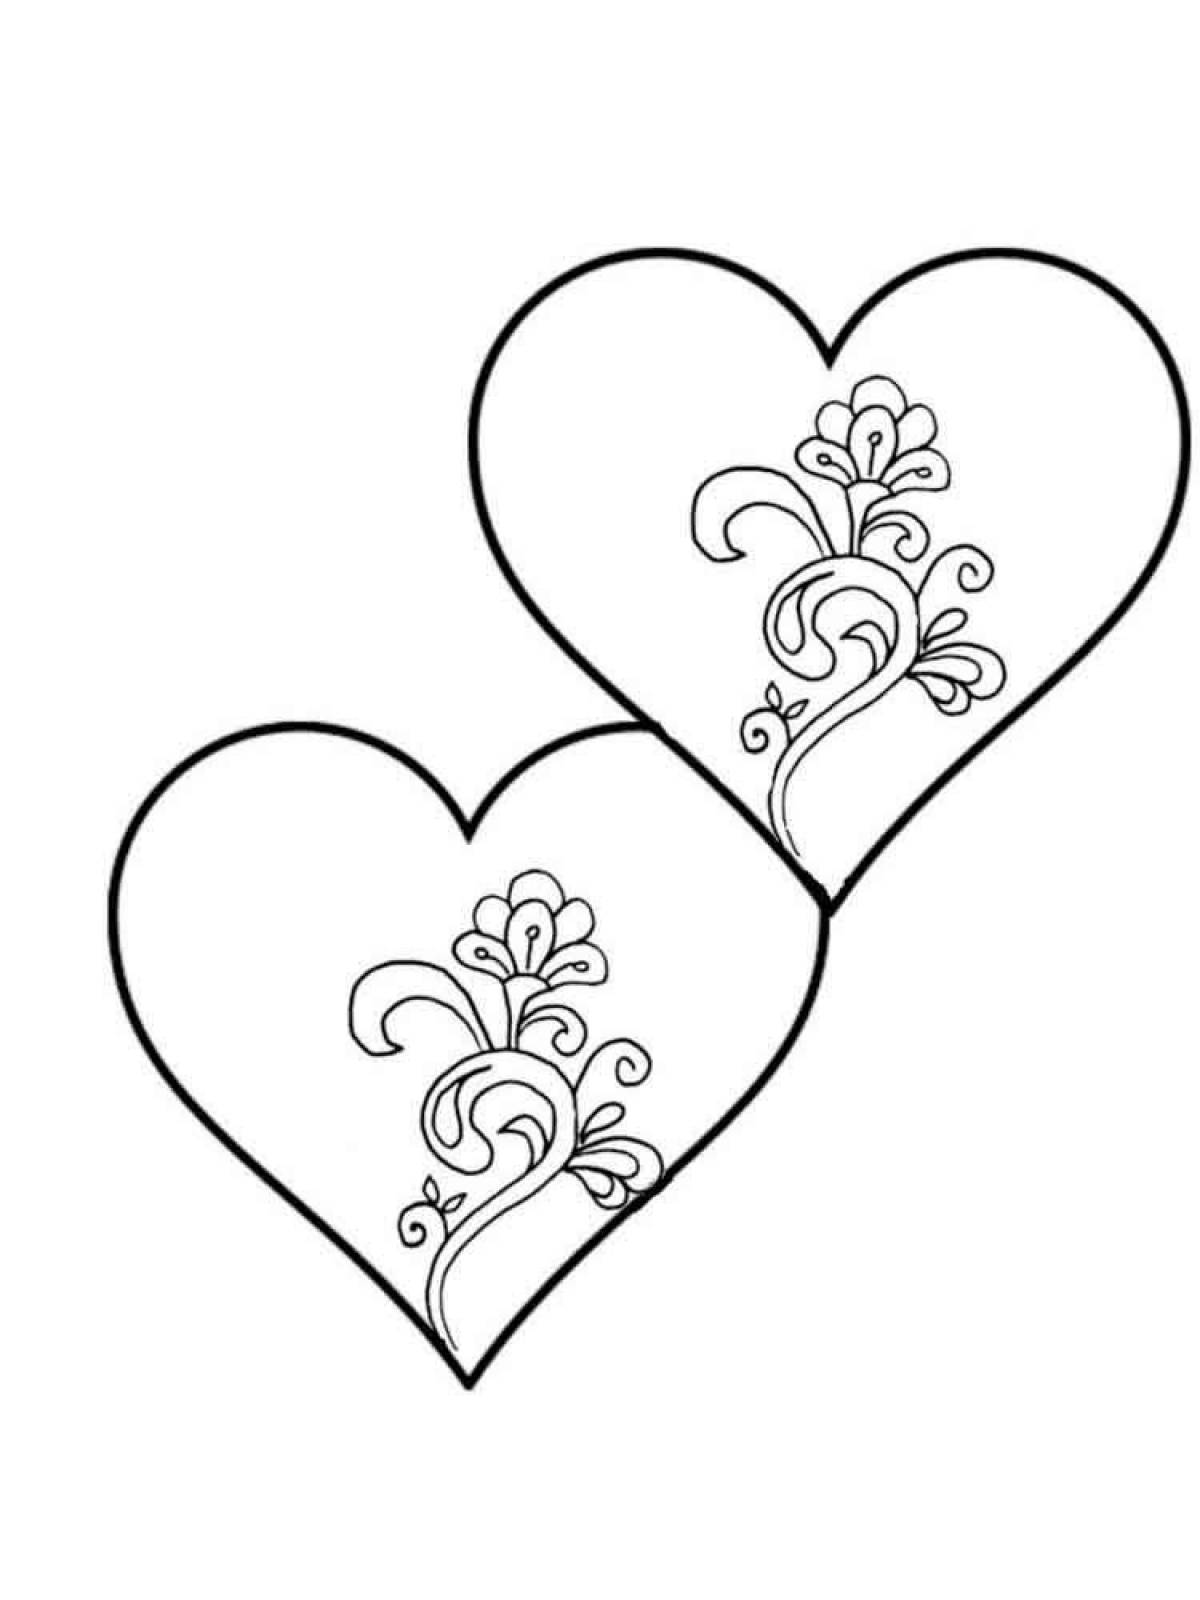 Amazing heart coloring page